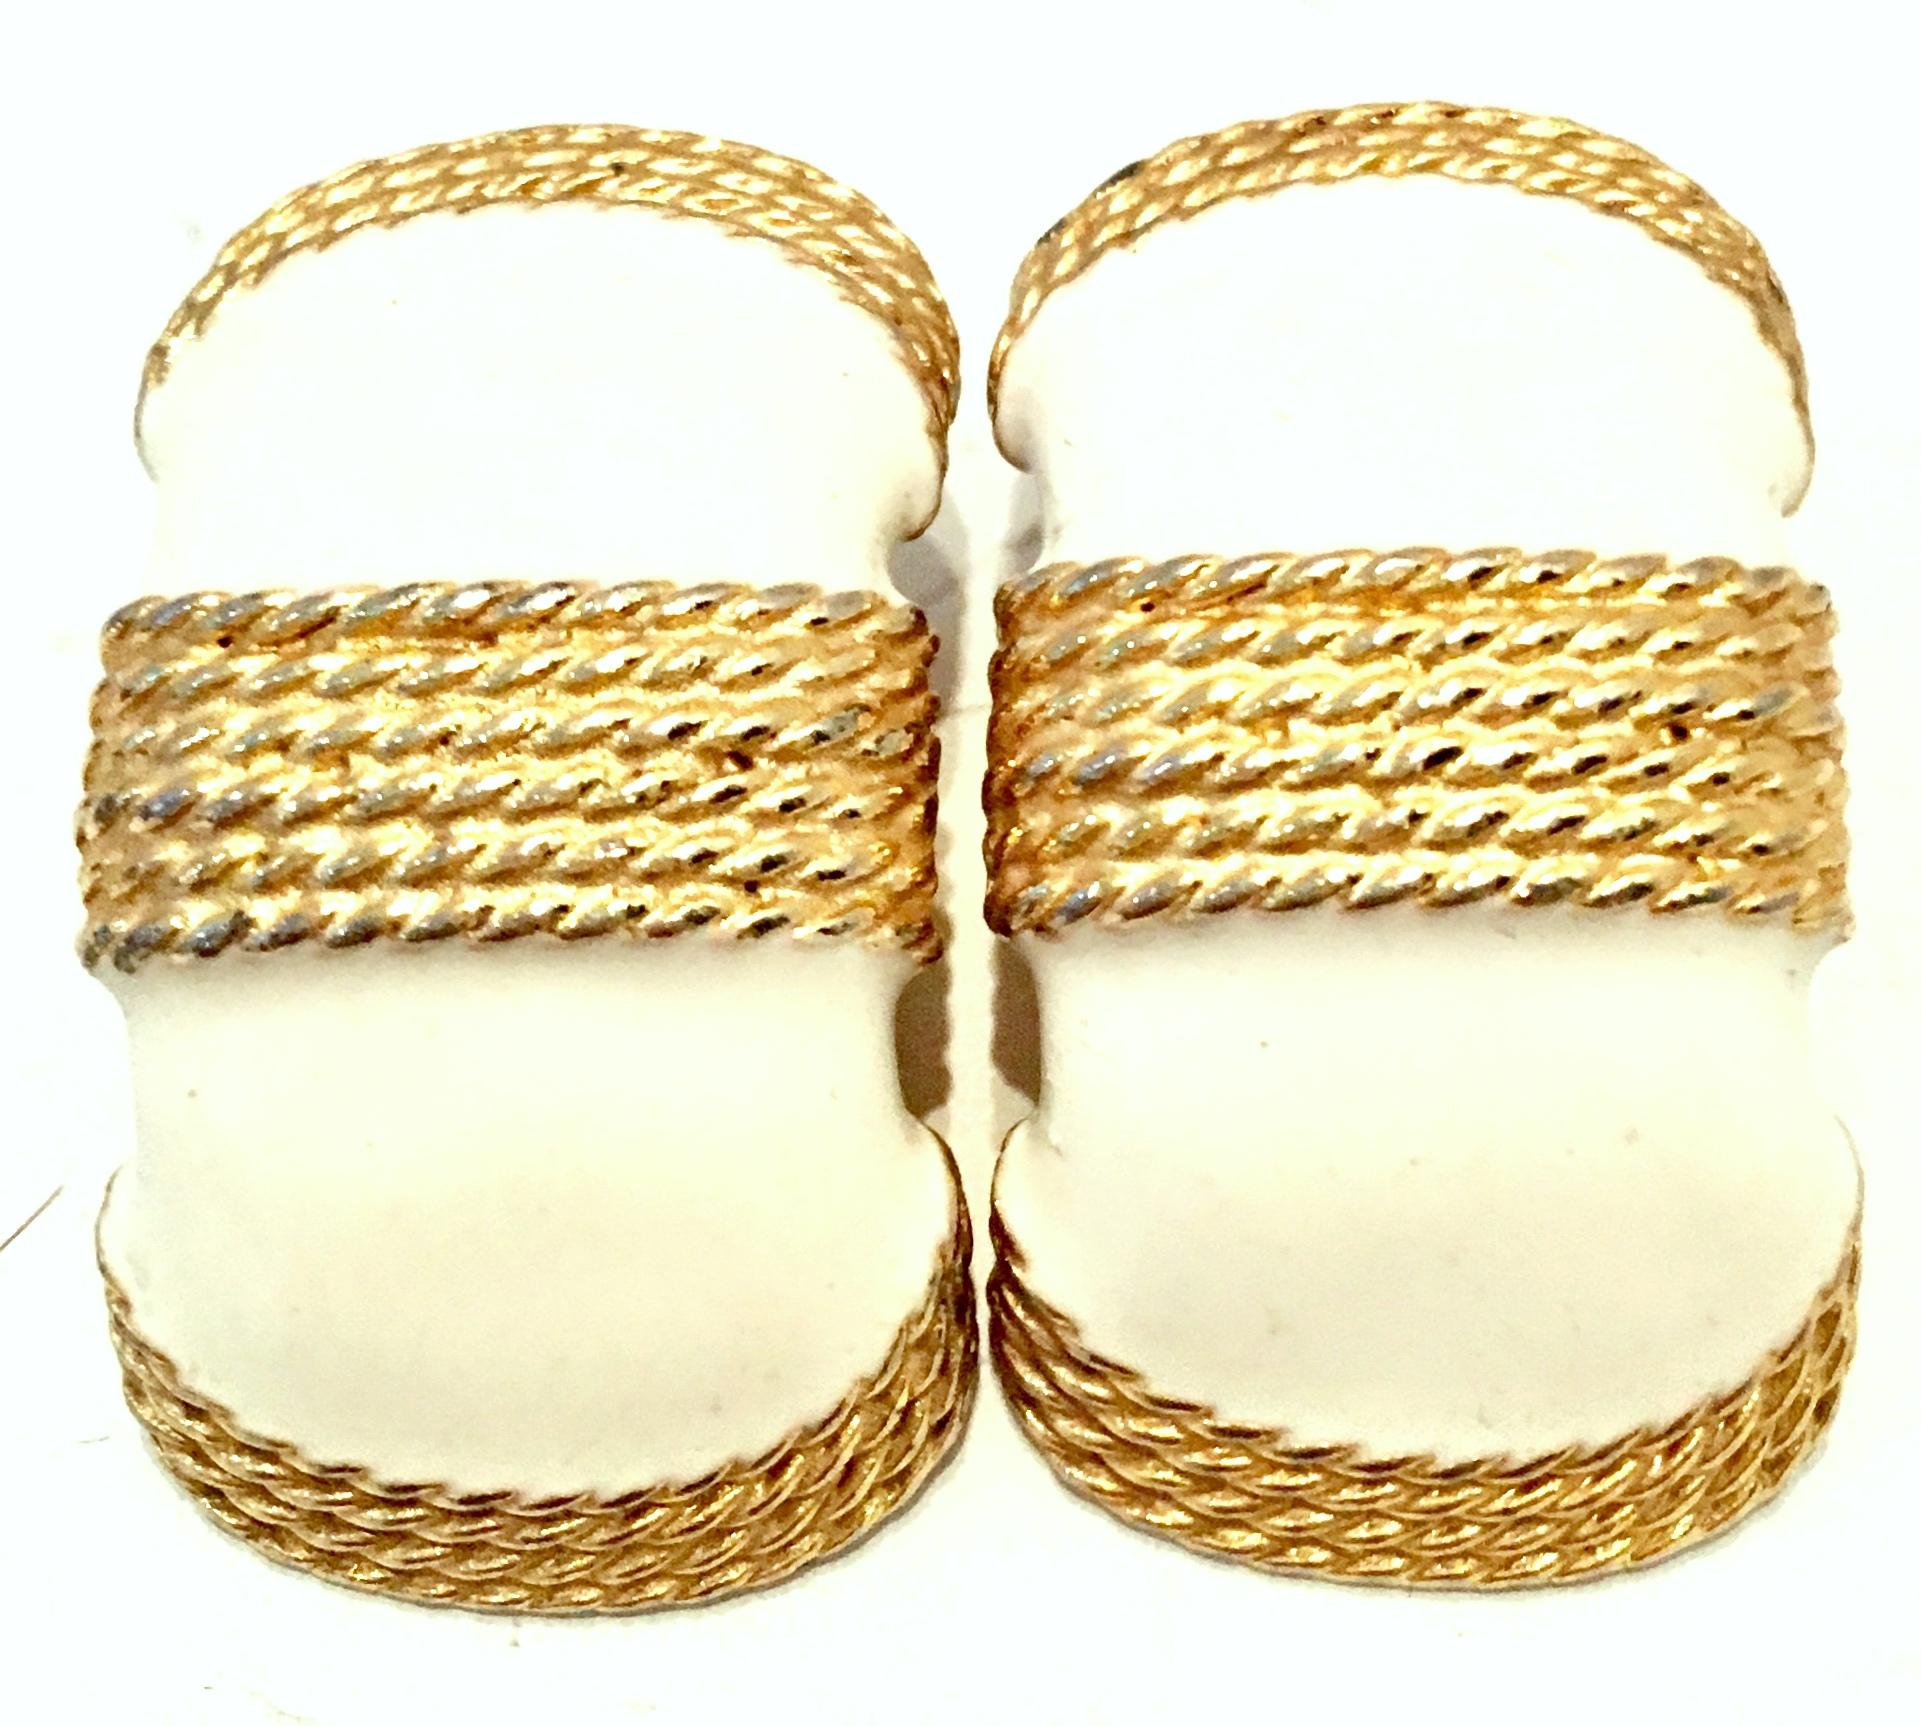 20th Century Pair Of Gold Plate & Enamel Earrings By, Gay Boyer. These crescent shaped gold clip style earrings feature off white enamel and gold overlay braid detail.
Signed on the underside, Gay Boyer.